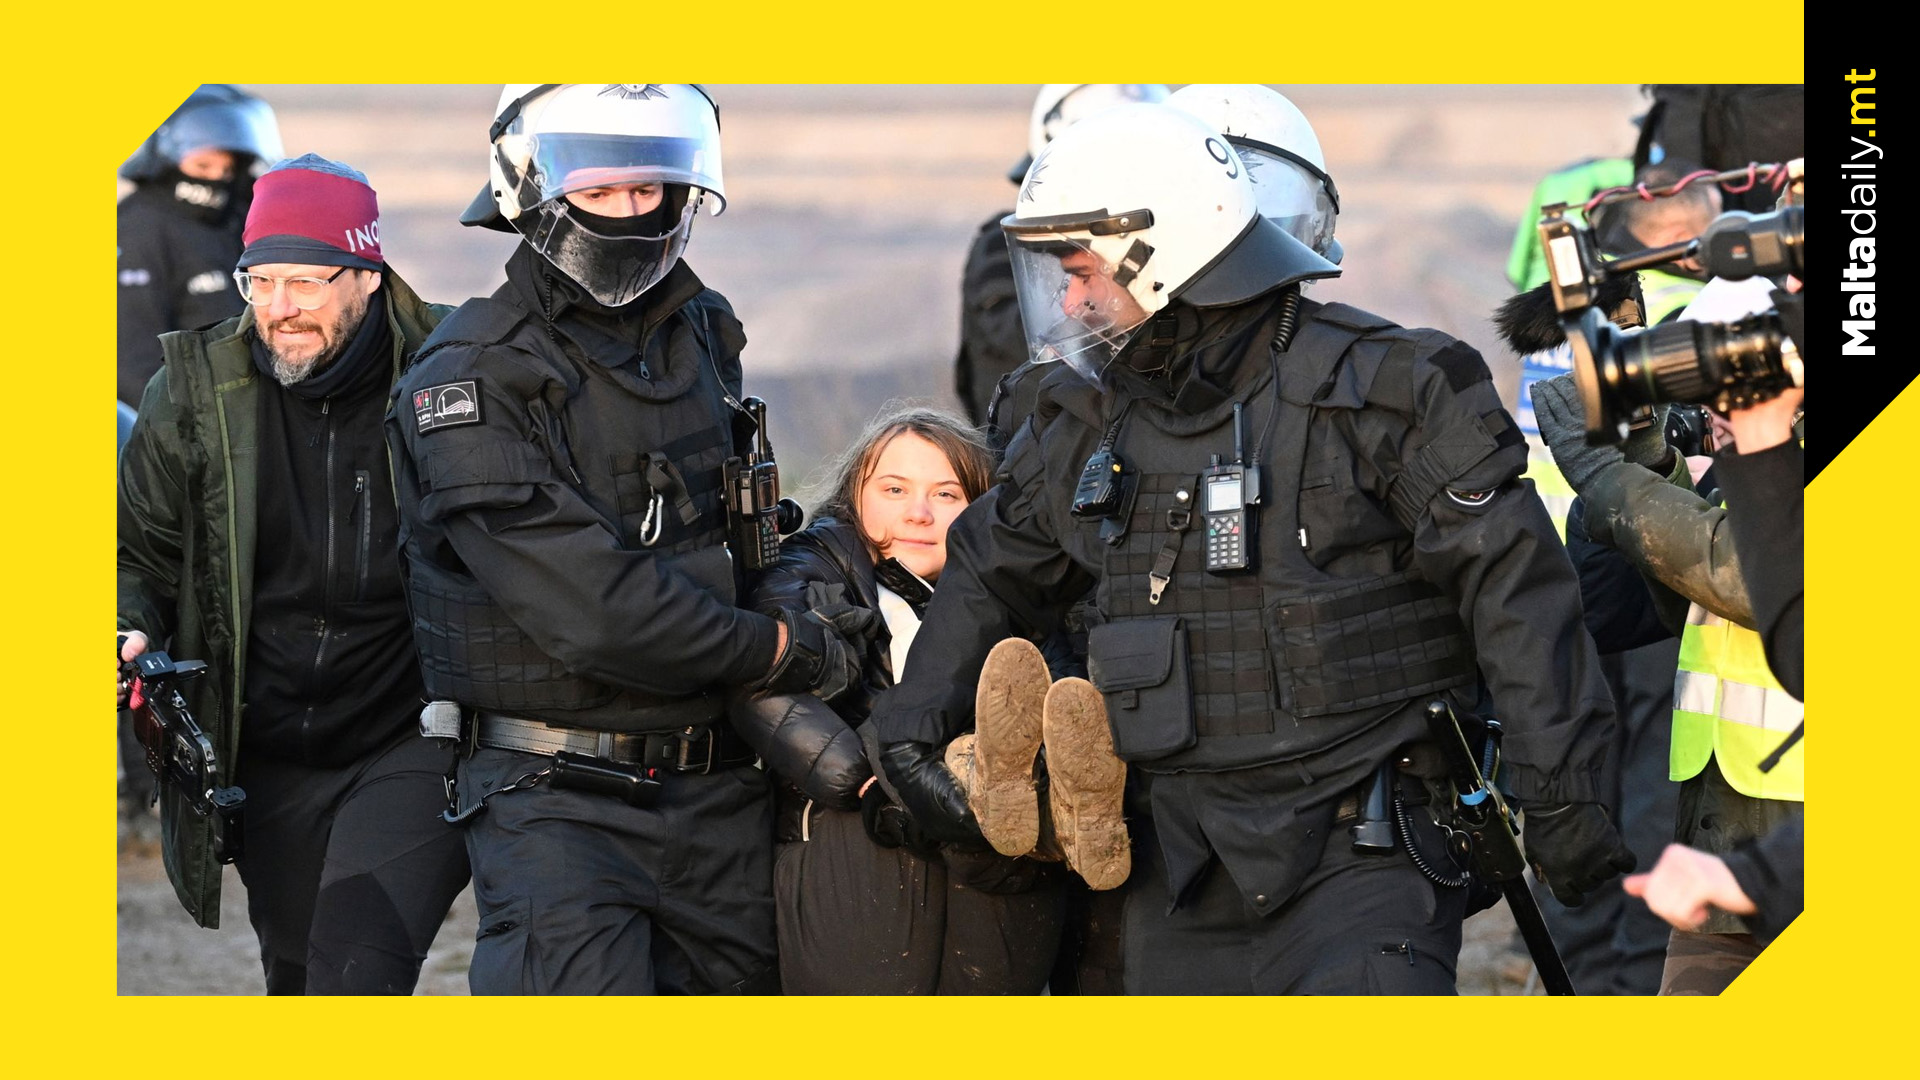 Greta Thunberg detained by German police during eco-protest in small village